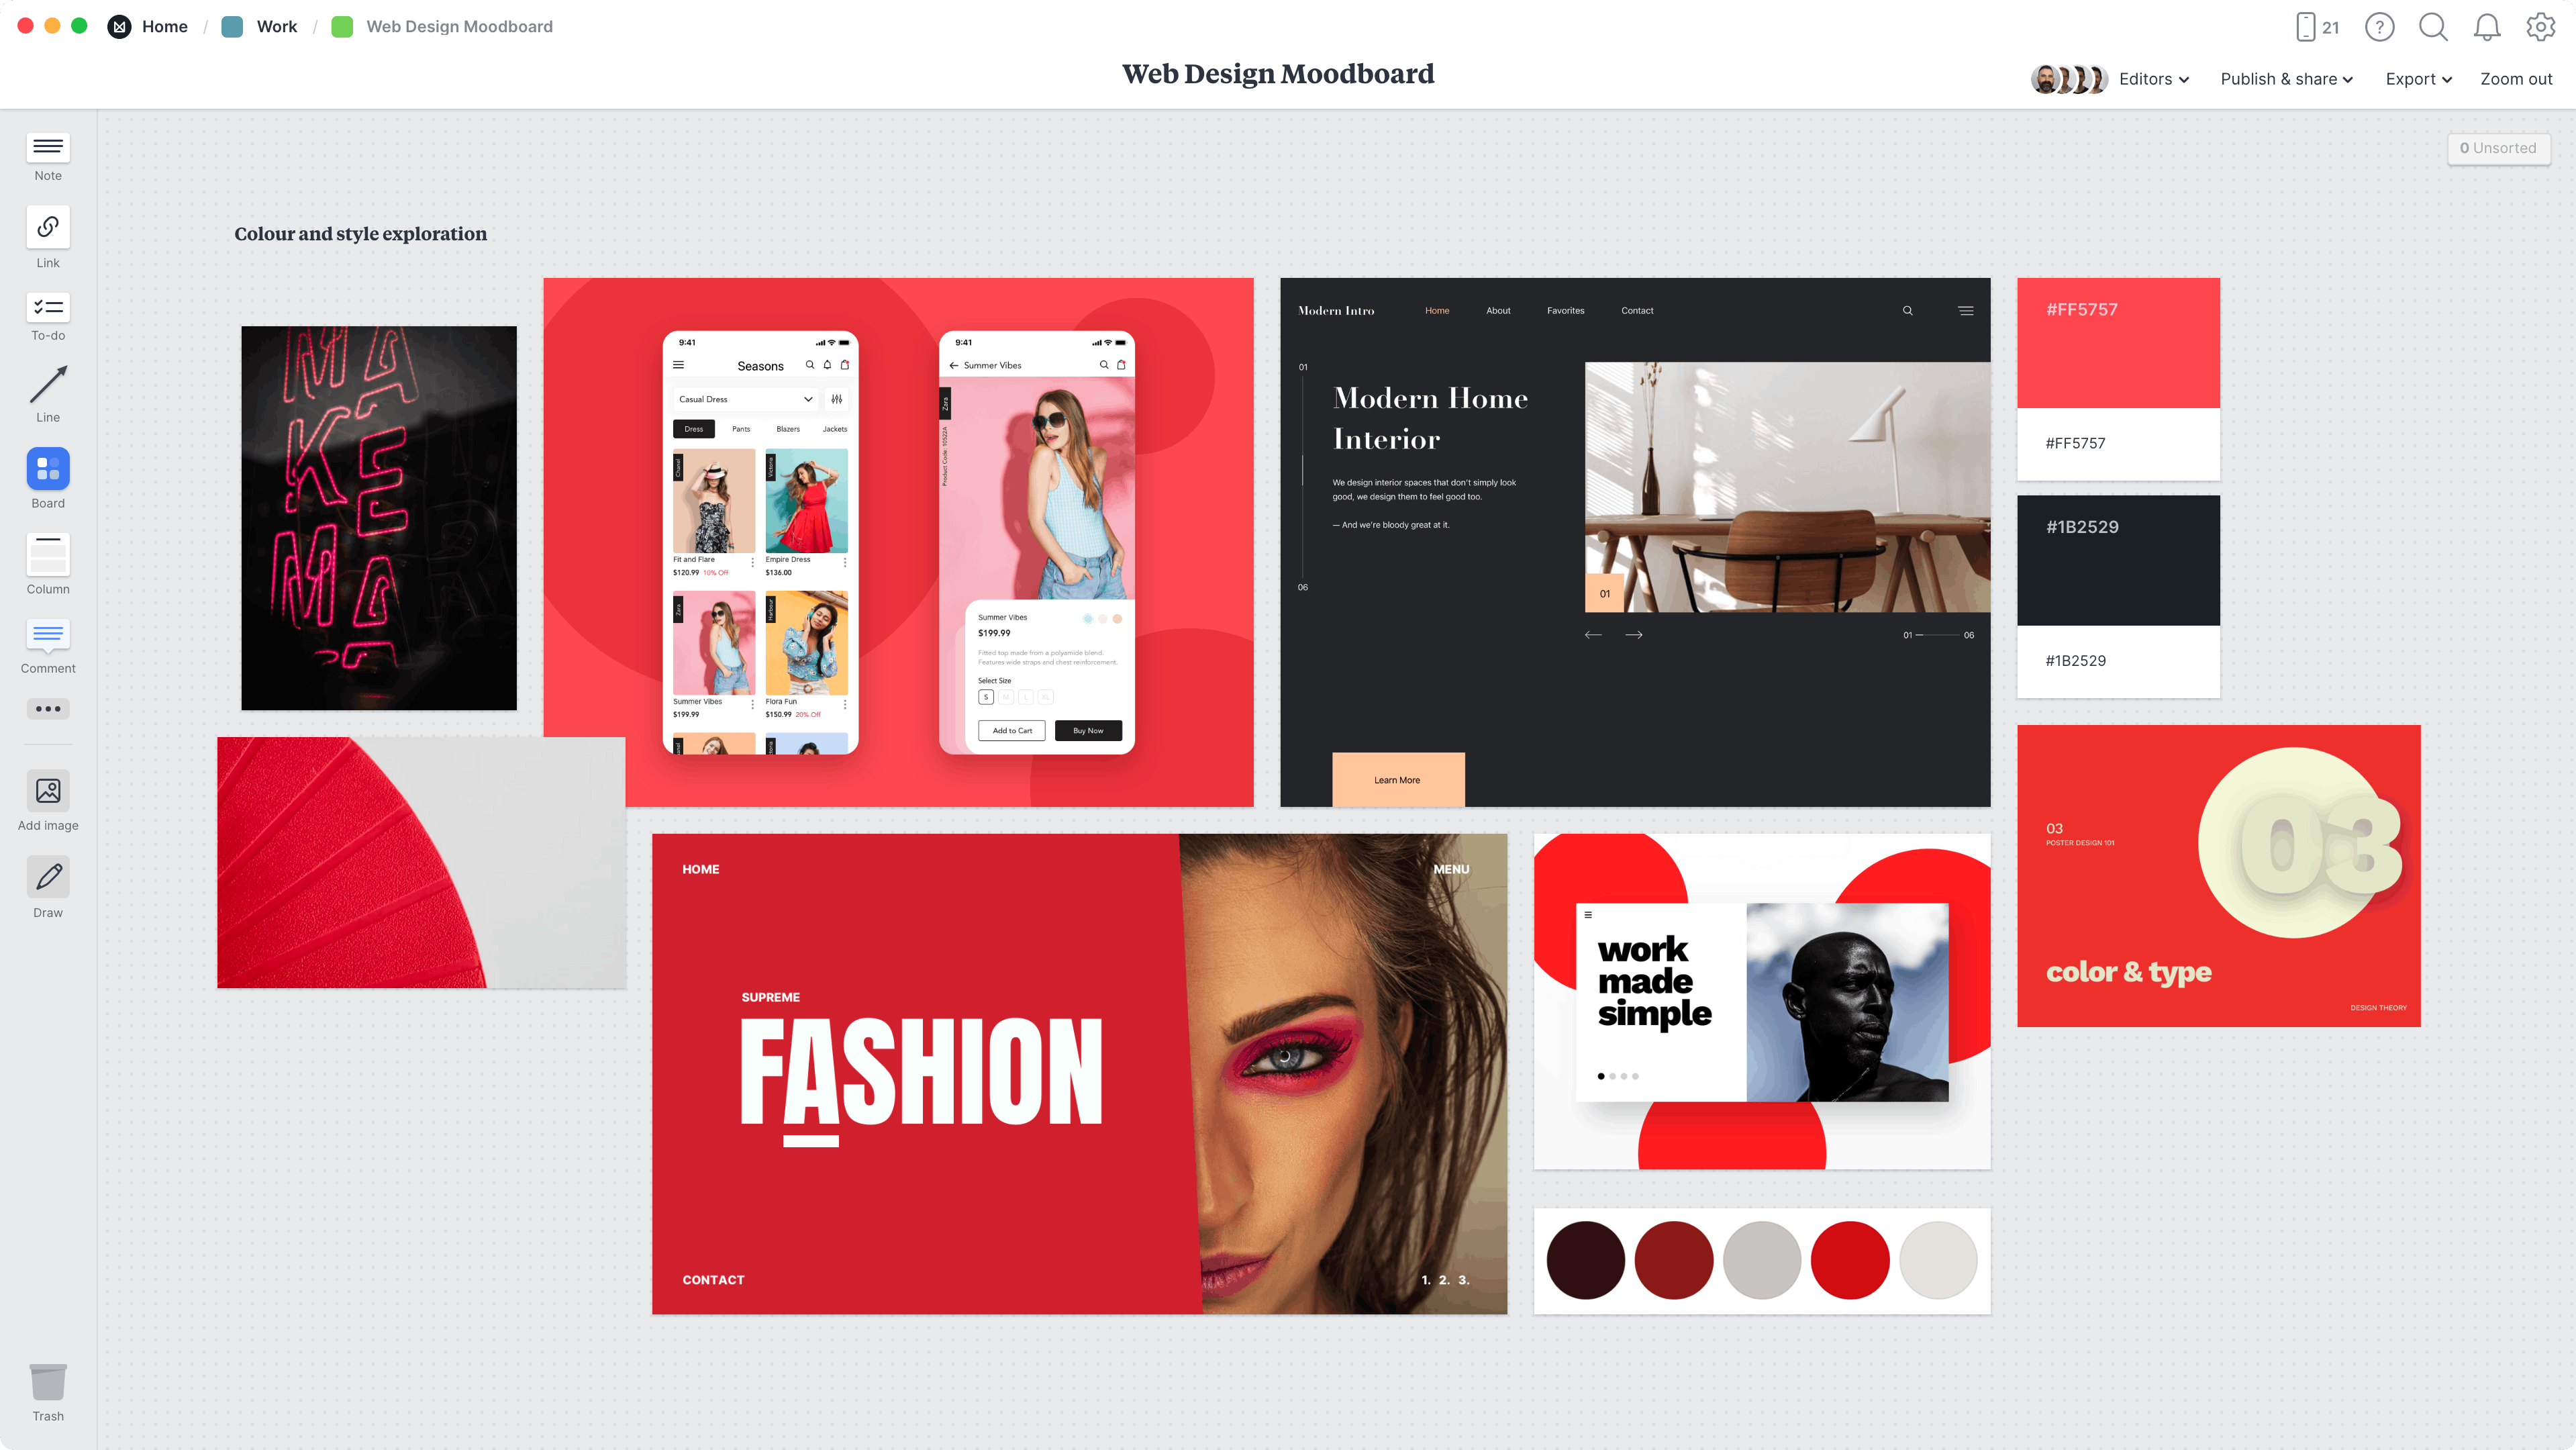 Web Design Moodboard Template, within the Milanote app